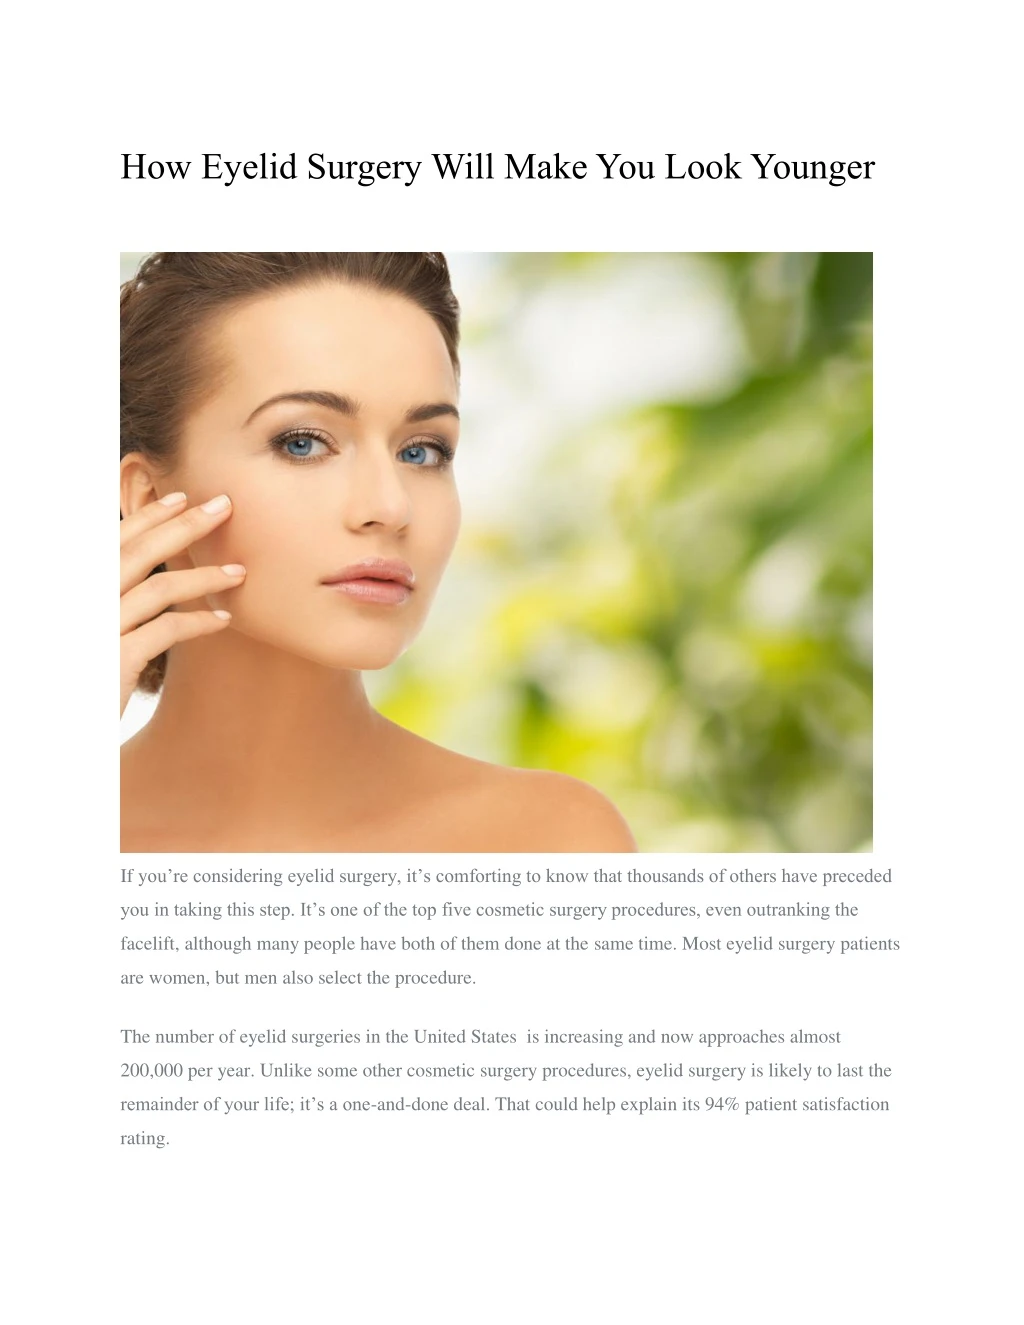 how eyelid surgery will make you look younger